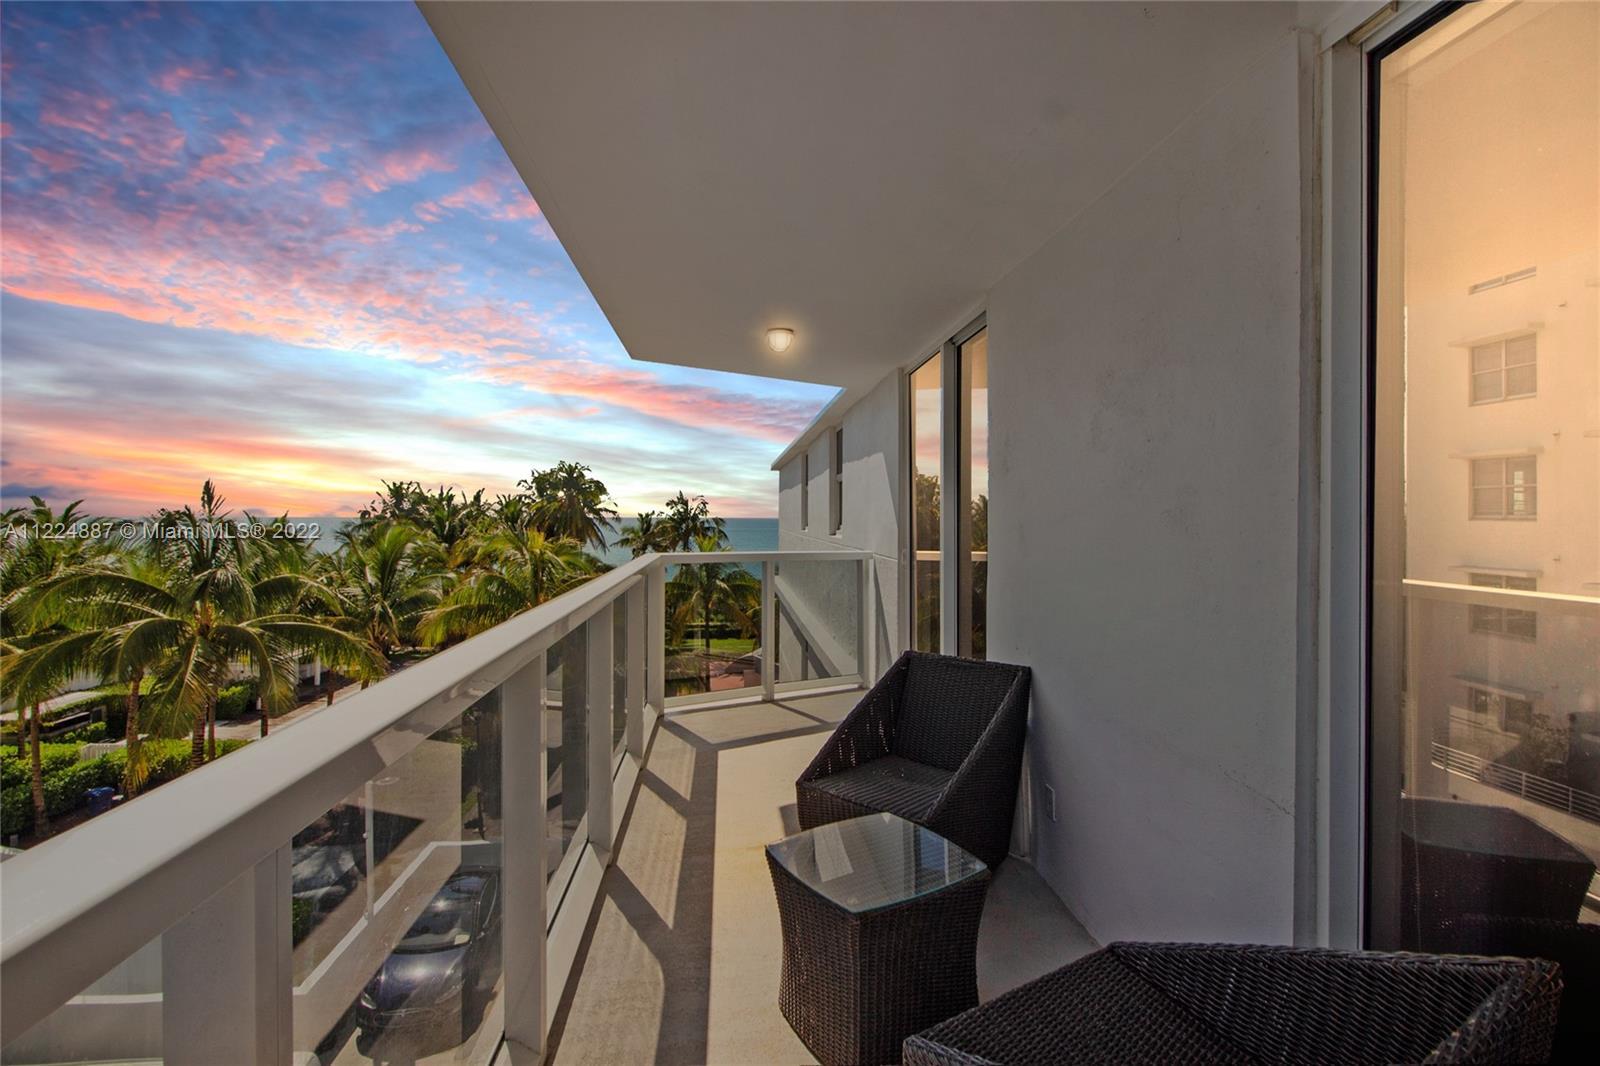 Fully renovated, over 1,000+ SF, Oceanfront condo in the BEST location of Miami Beach. 1 bedroom w/ 